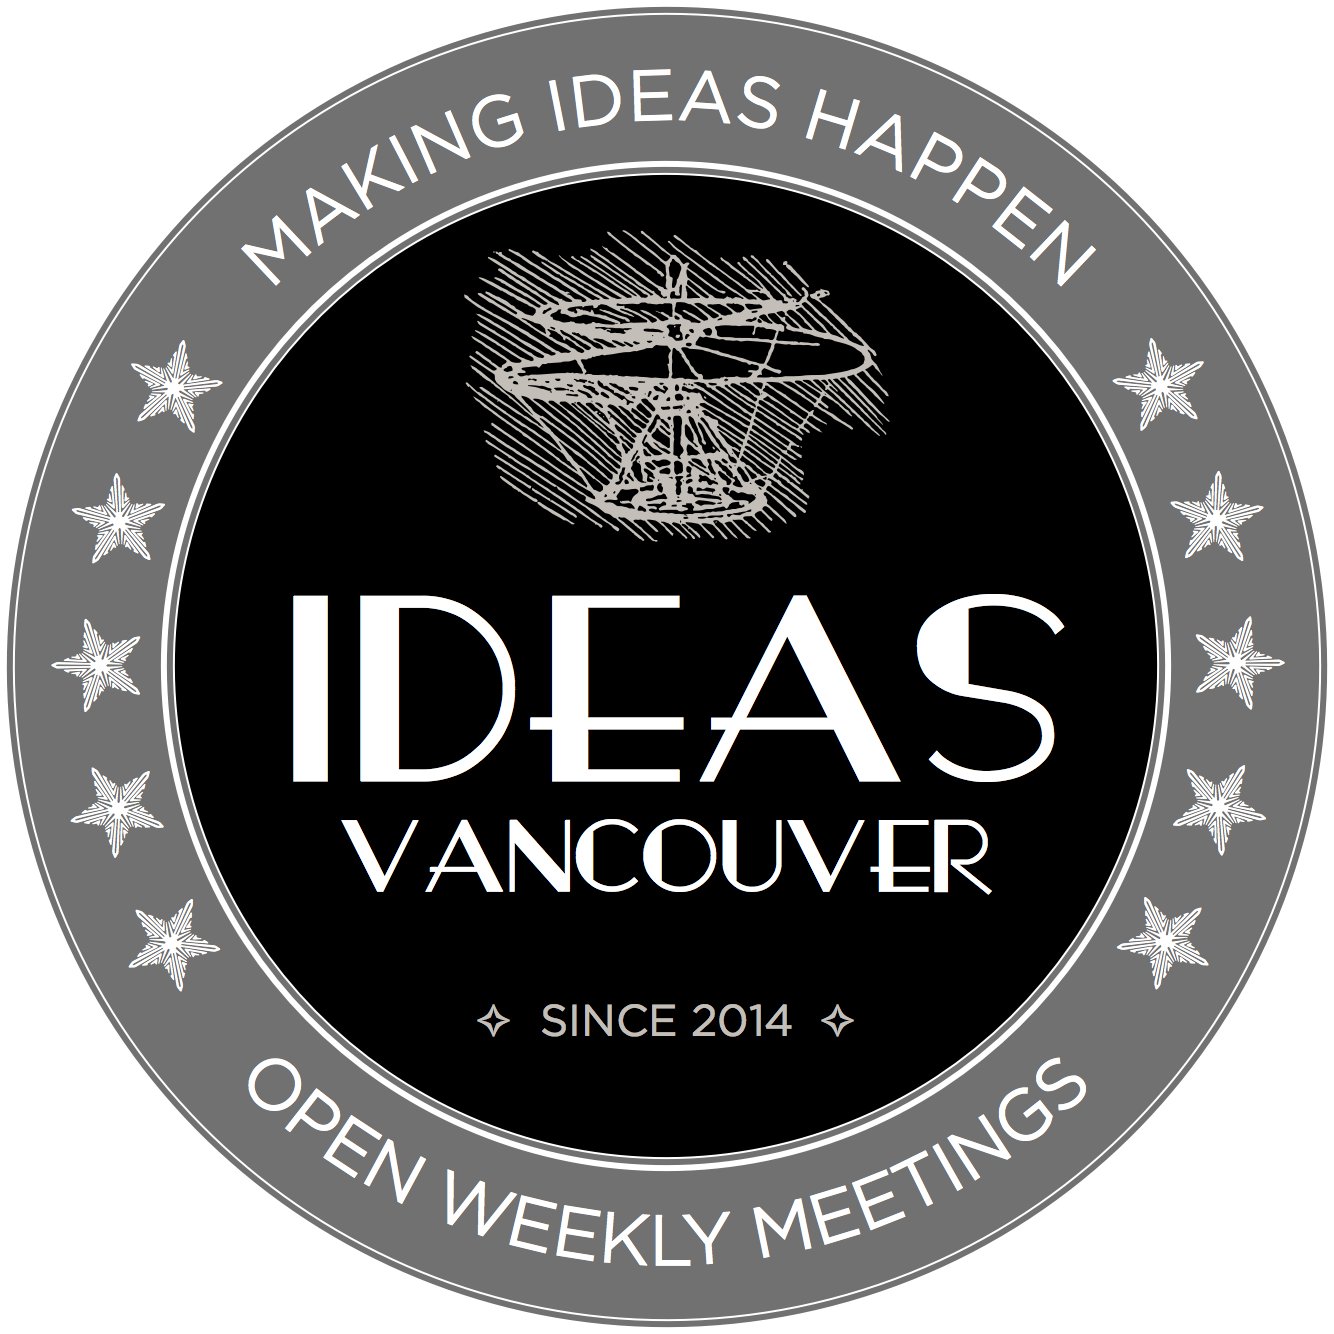 Creative thinkers with a history of making their ideas happen are encouraged to join. Community builders and doers also welcome. If not in your city yet, create